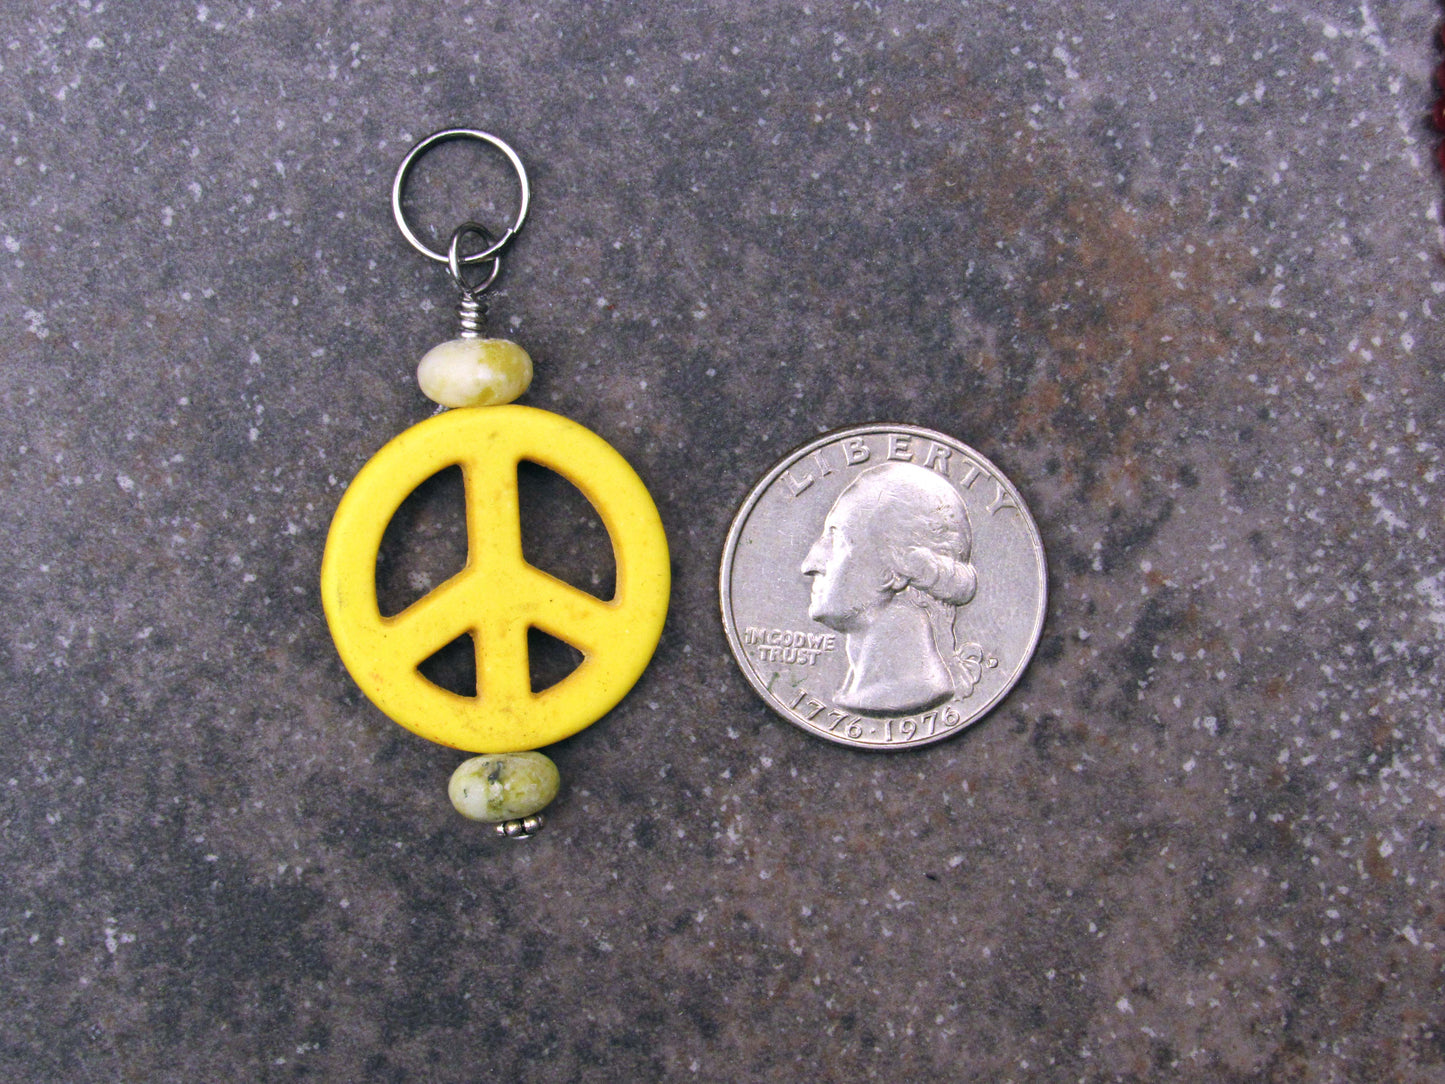 Pet Charm with Peace Signs & various Gemstone